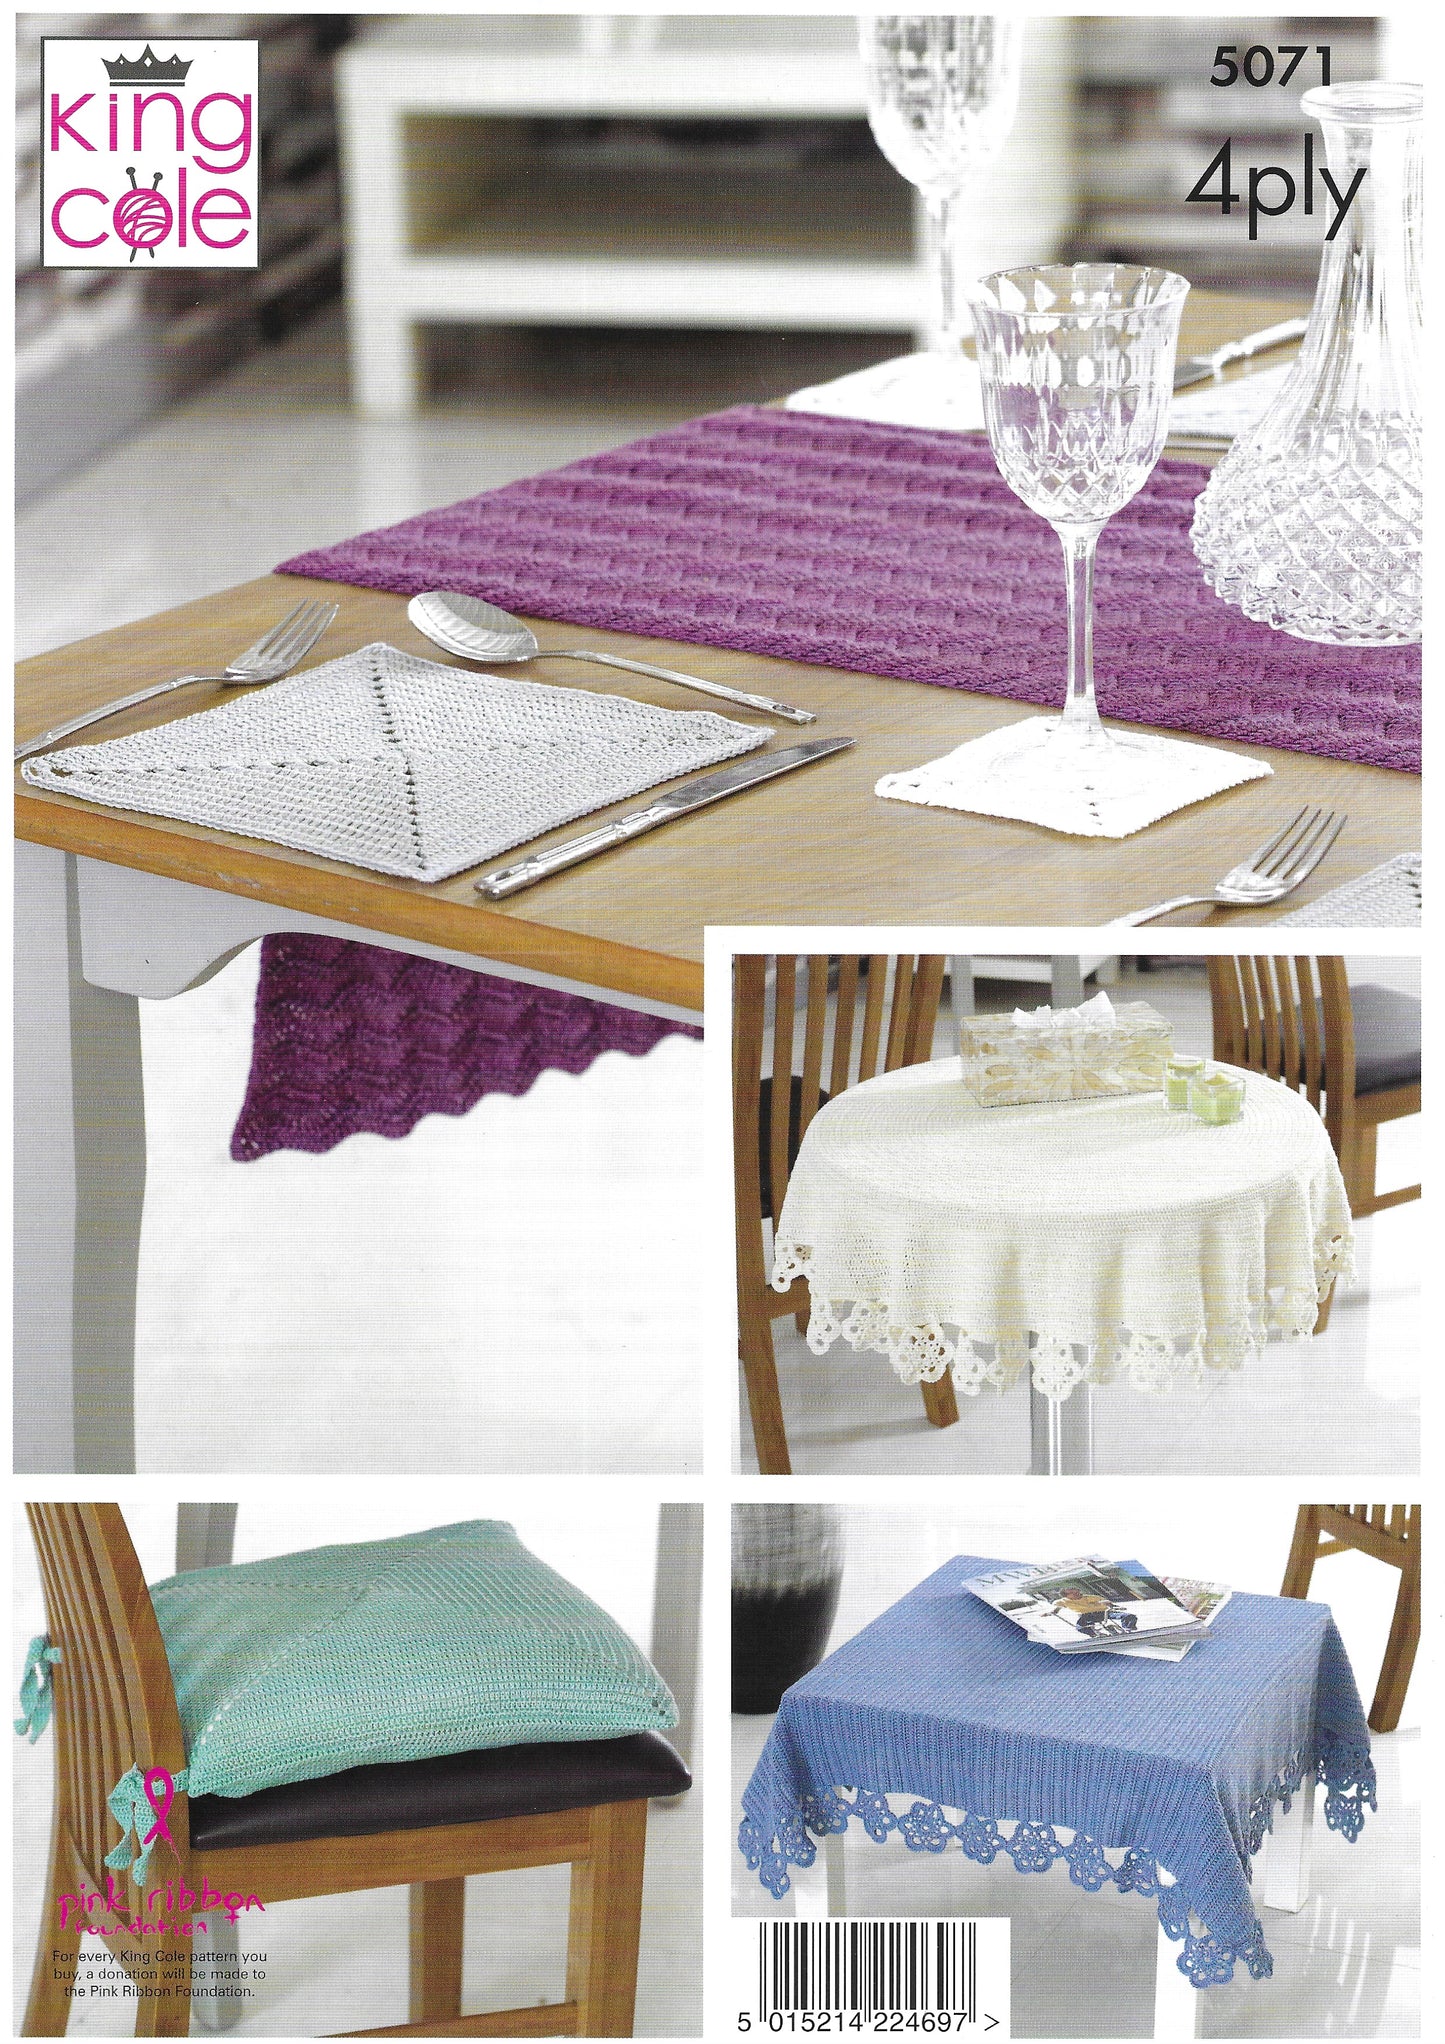 King Cole 5071 Table Mats, Coasters, Runner, Seat Pads & Table Cloths 4ply Crochet Pattern